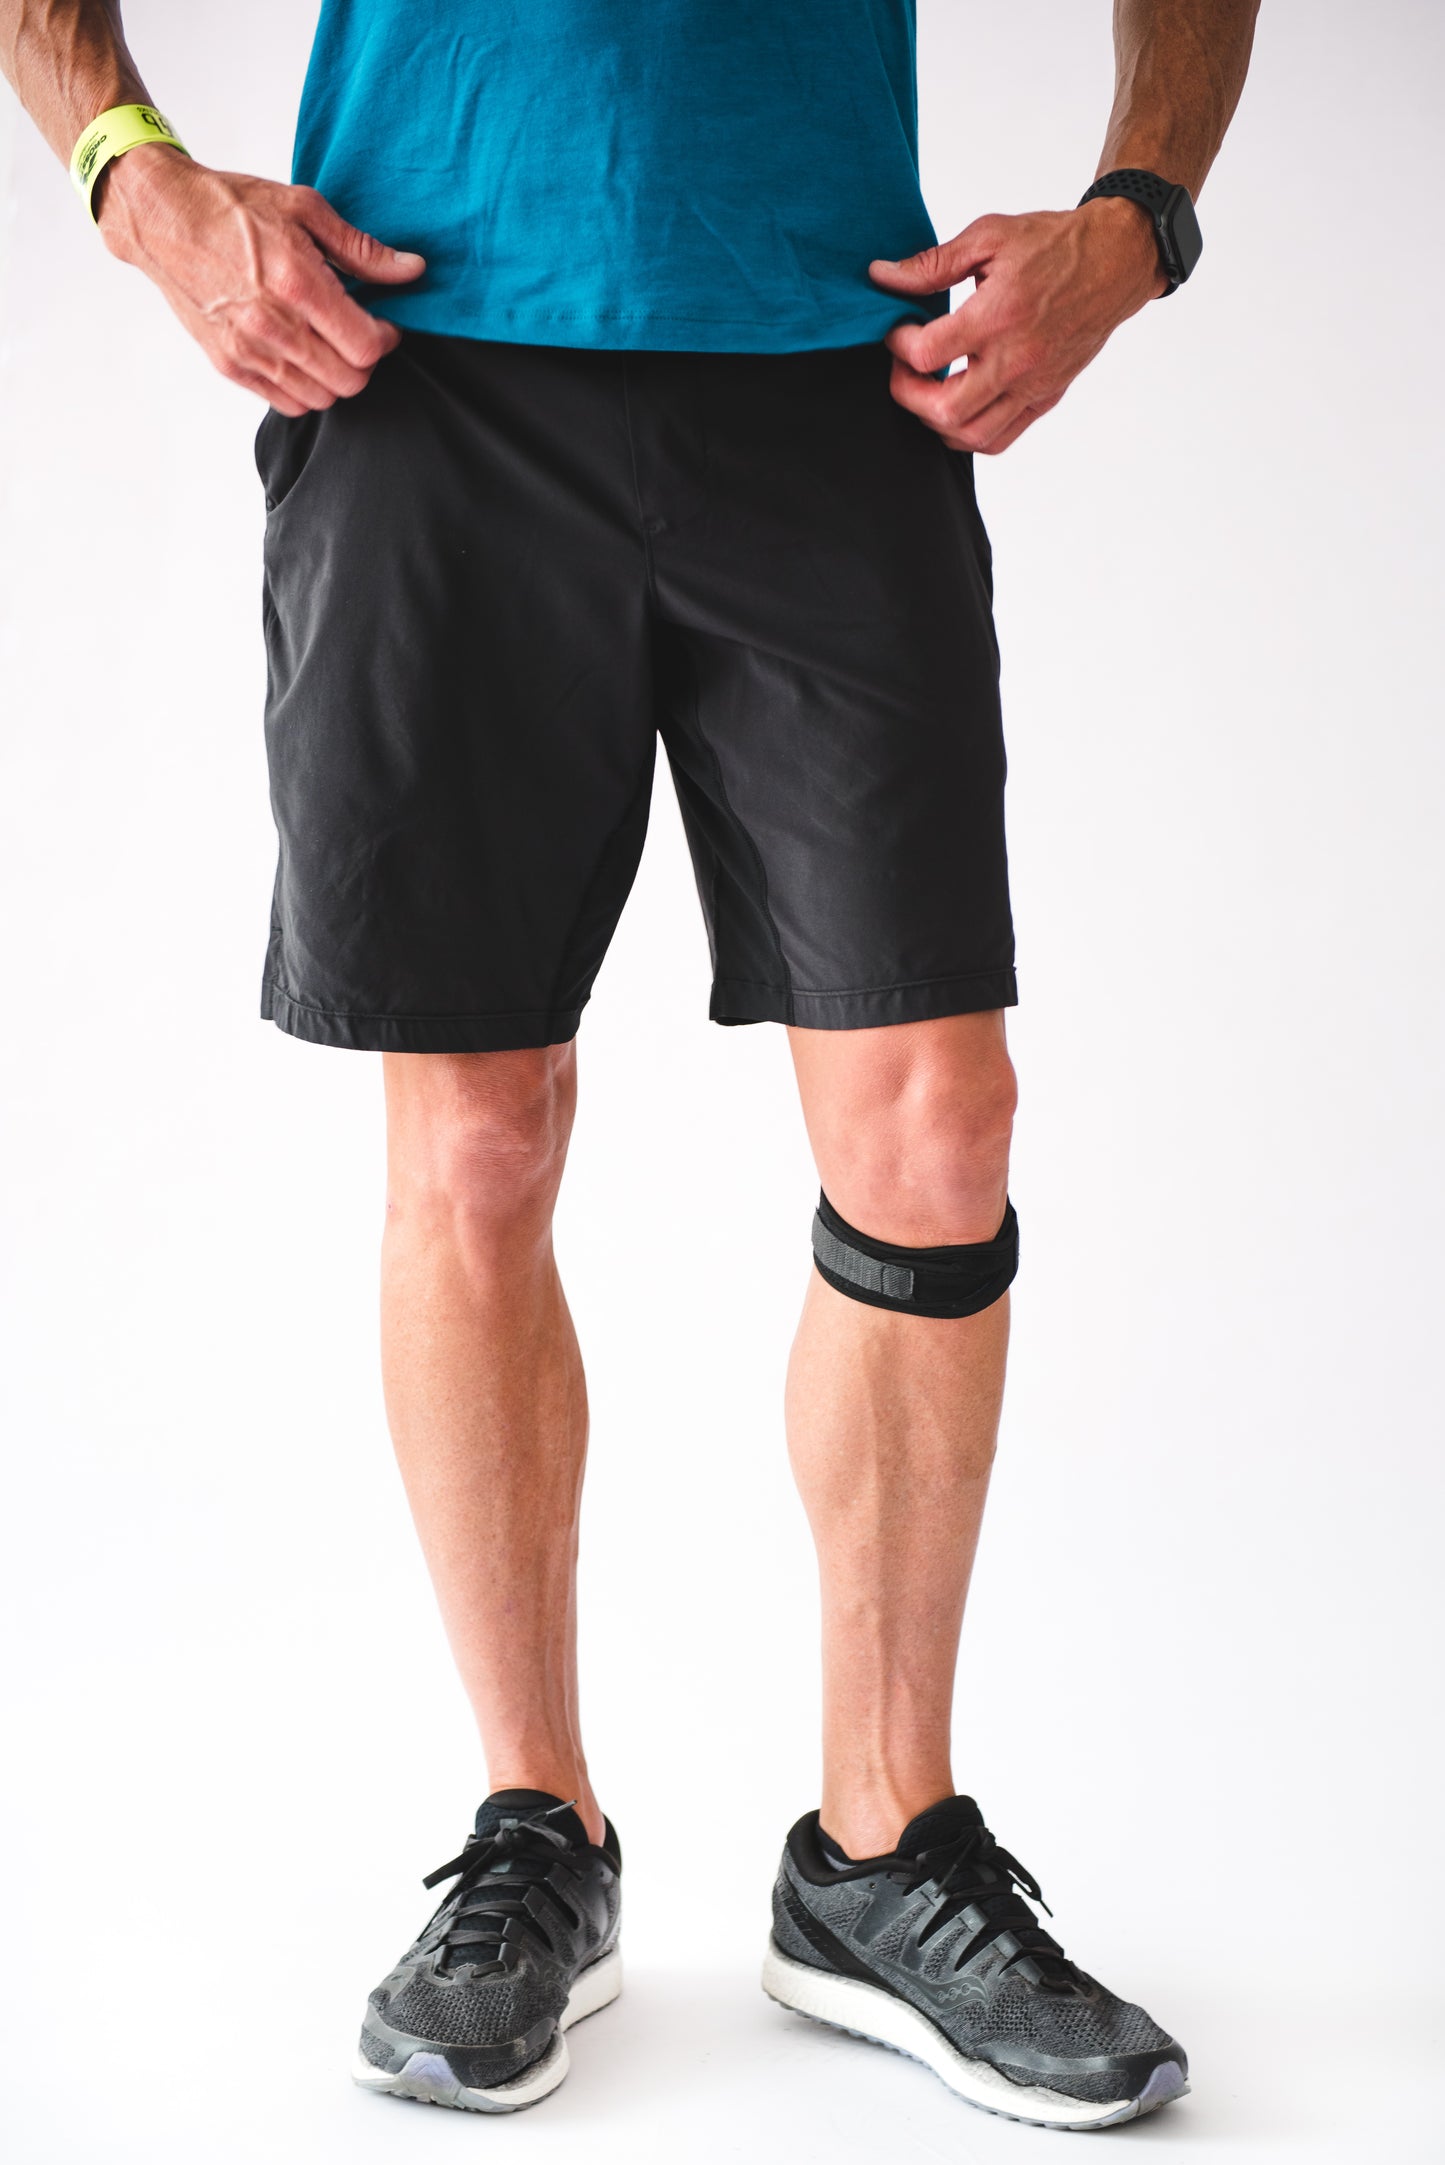 Patella Tendon Strap for Athletic Trainers